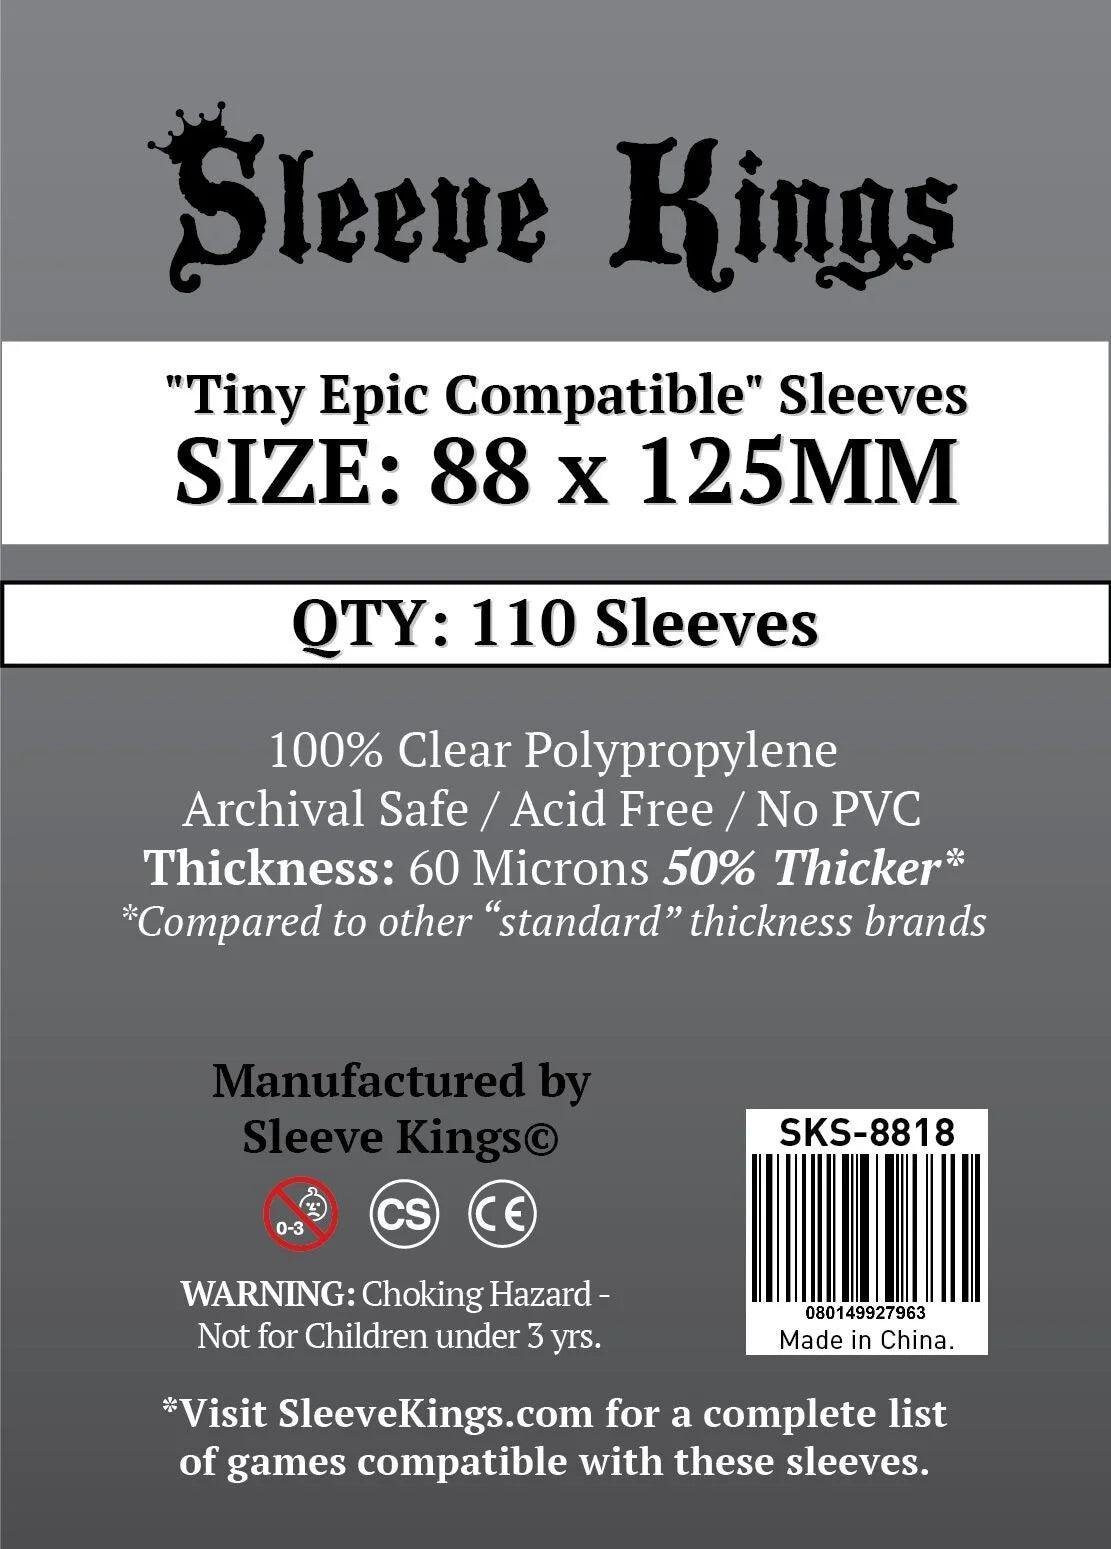 Sleeve Kings Board Game Sleeves "Tiny Epic Compatible" (88mm x 125mm) (110 Sleeves Per Pack) - Eclipse Games Puzzles Novelties